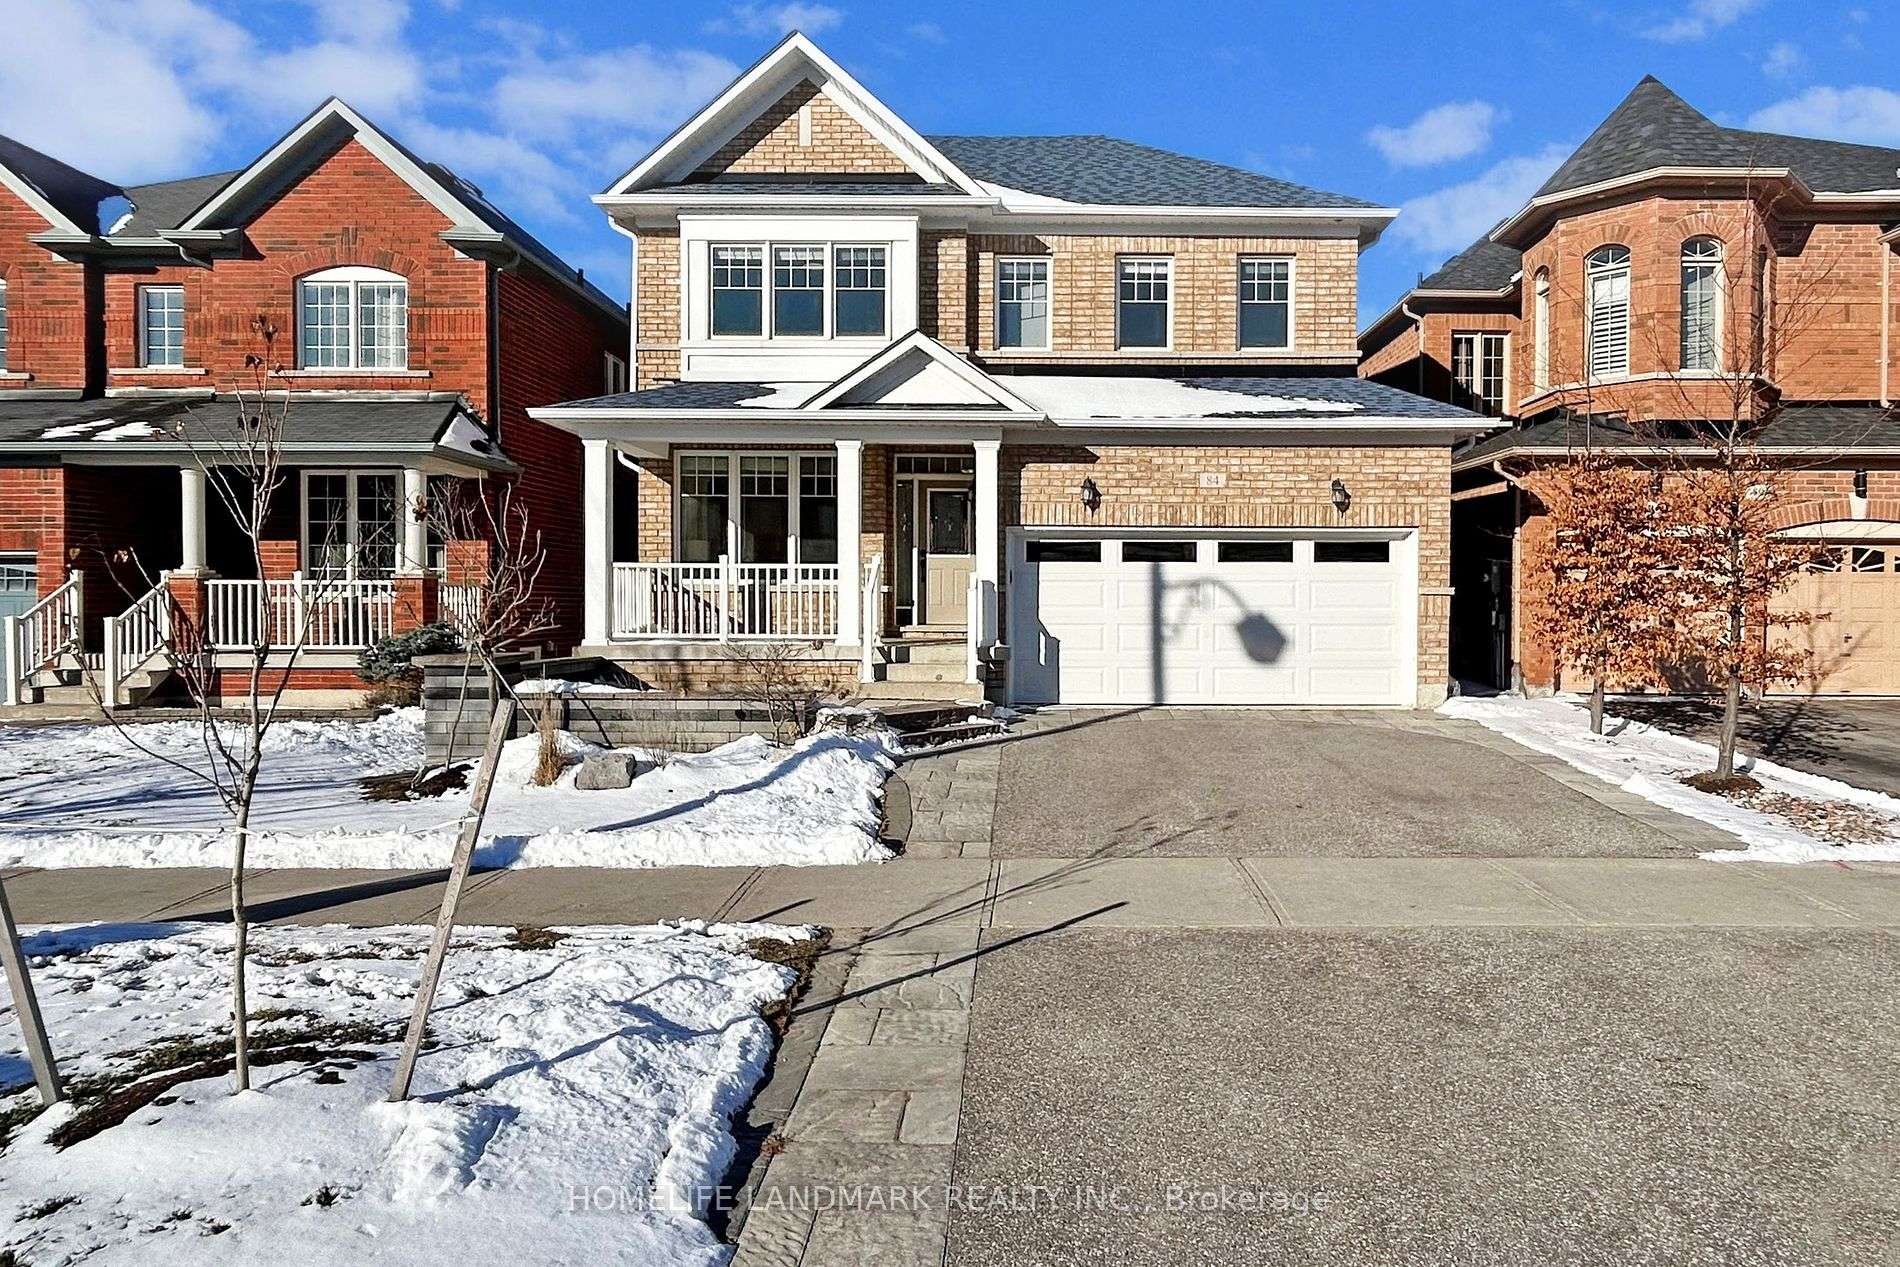 Ballantrae, Whitchurch-Stouffville, ON Homes for Sale & Real Estate